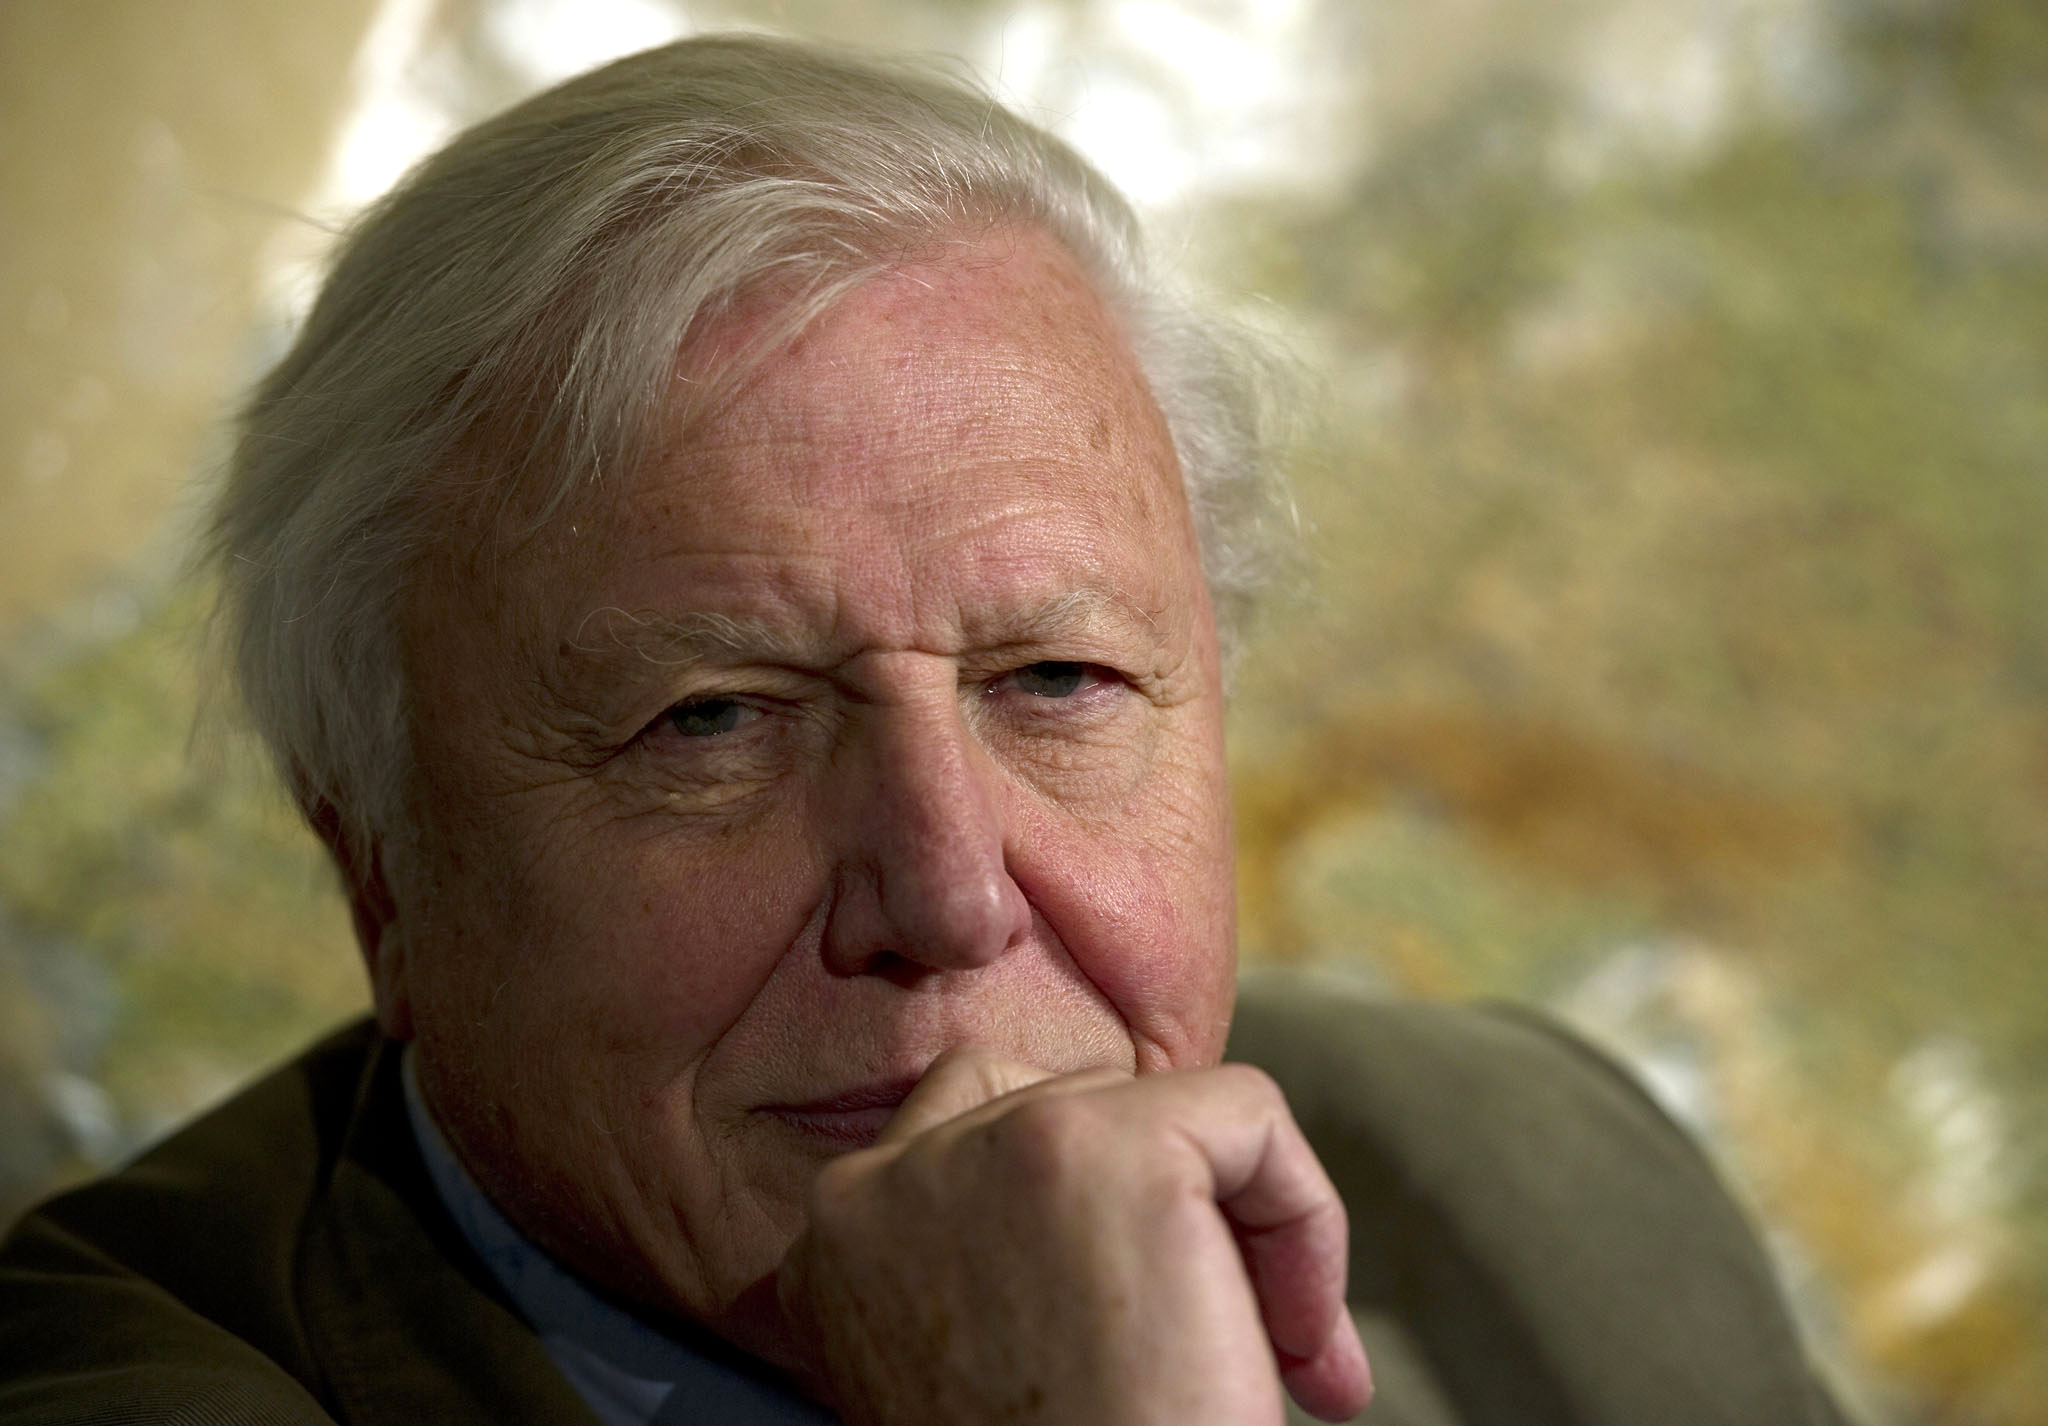 Sir David Attenborough said that Britain’s dense population meant that people had to make the most of the environment they had